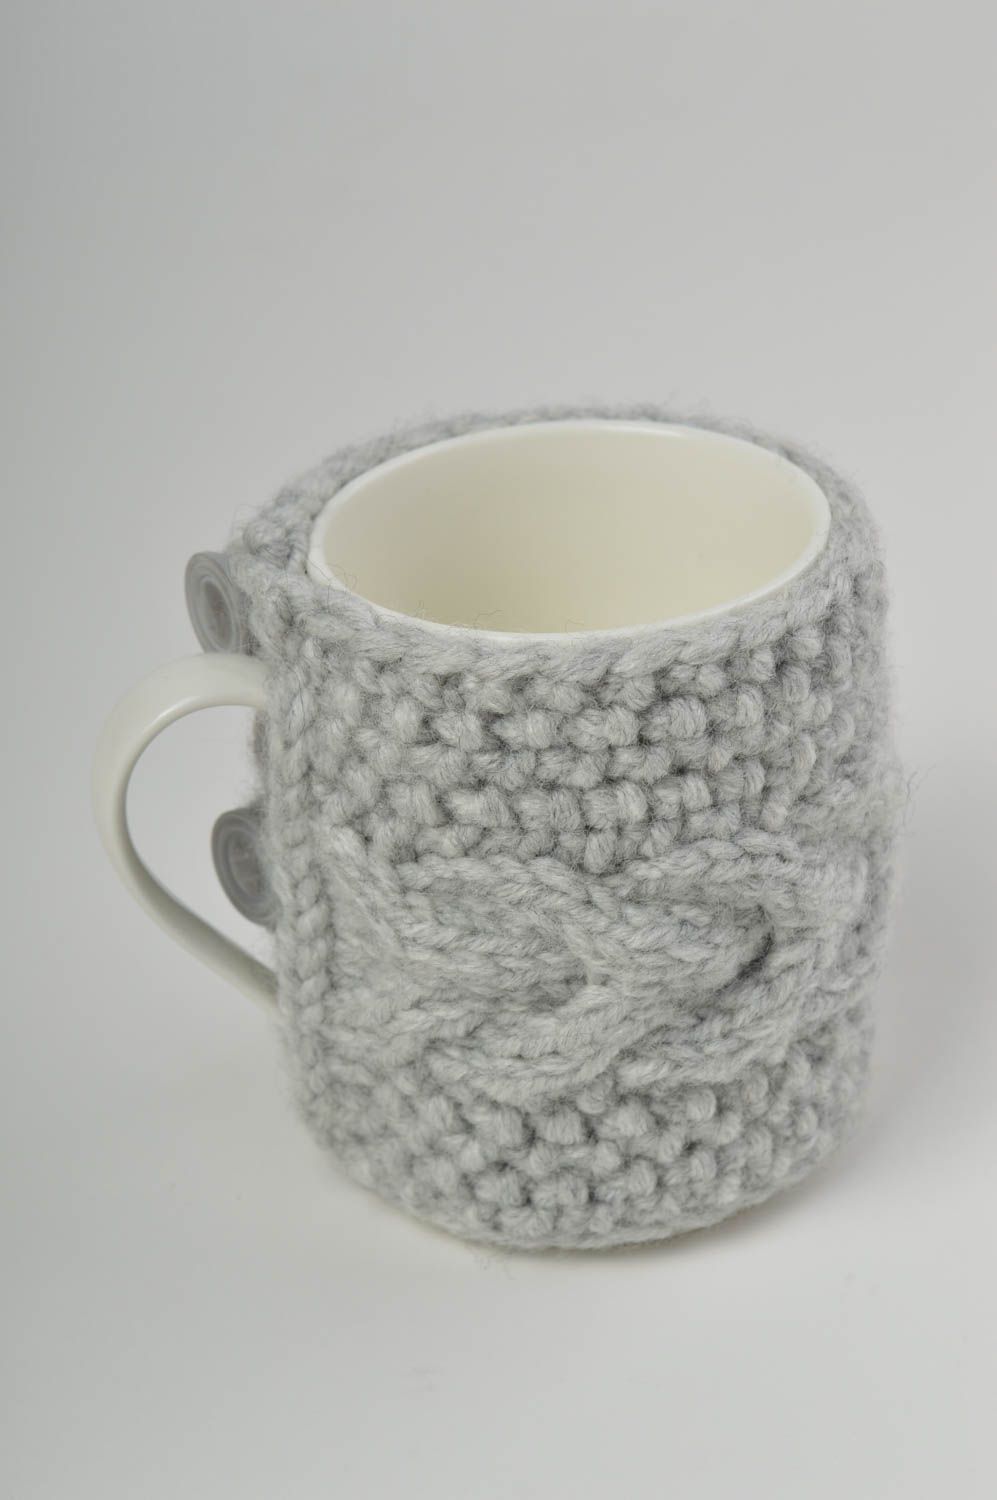 Stylish handmade cozy cup knitted cup cozy porcelain cup handmade gifts photo 2